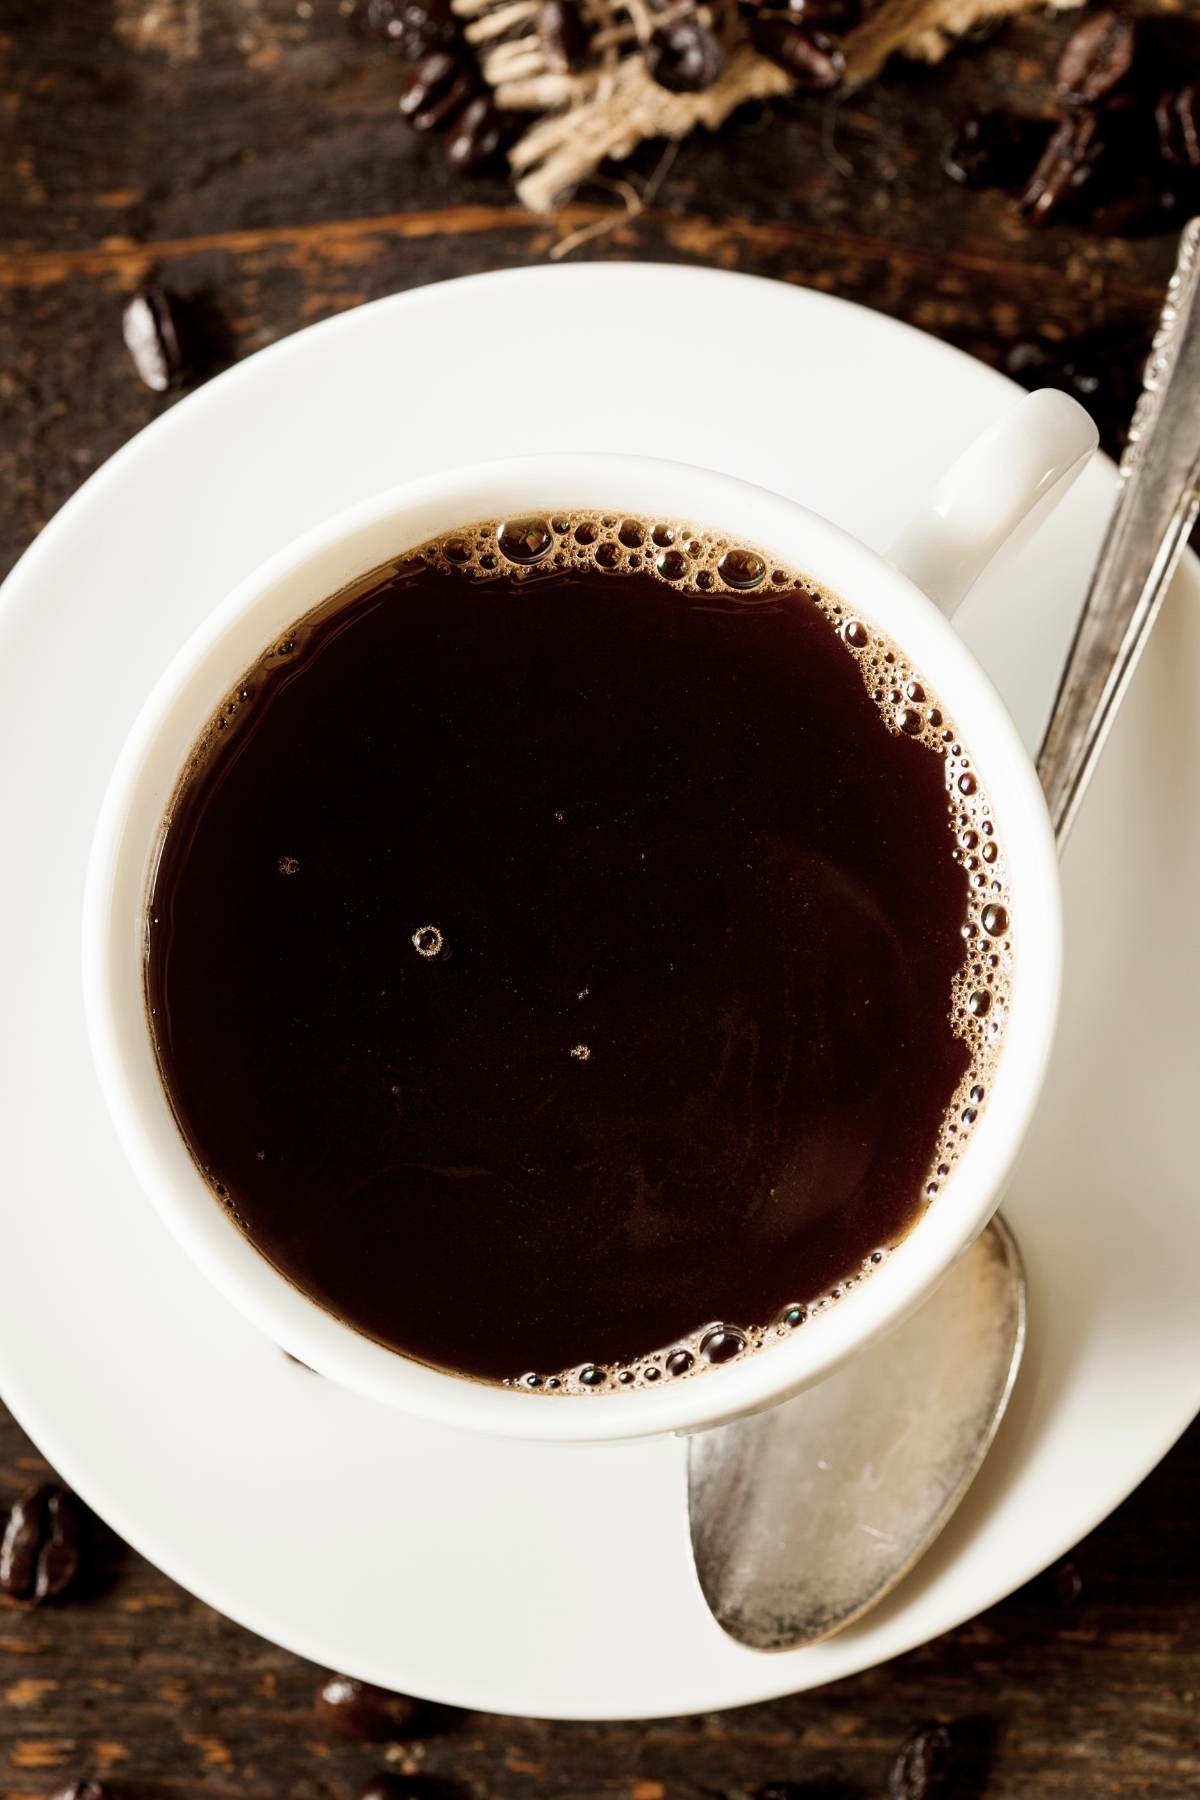 You can make a hot and delicious Americano Coffee at home! It’s super easy, and all you need is espresso and hot water.